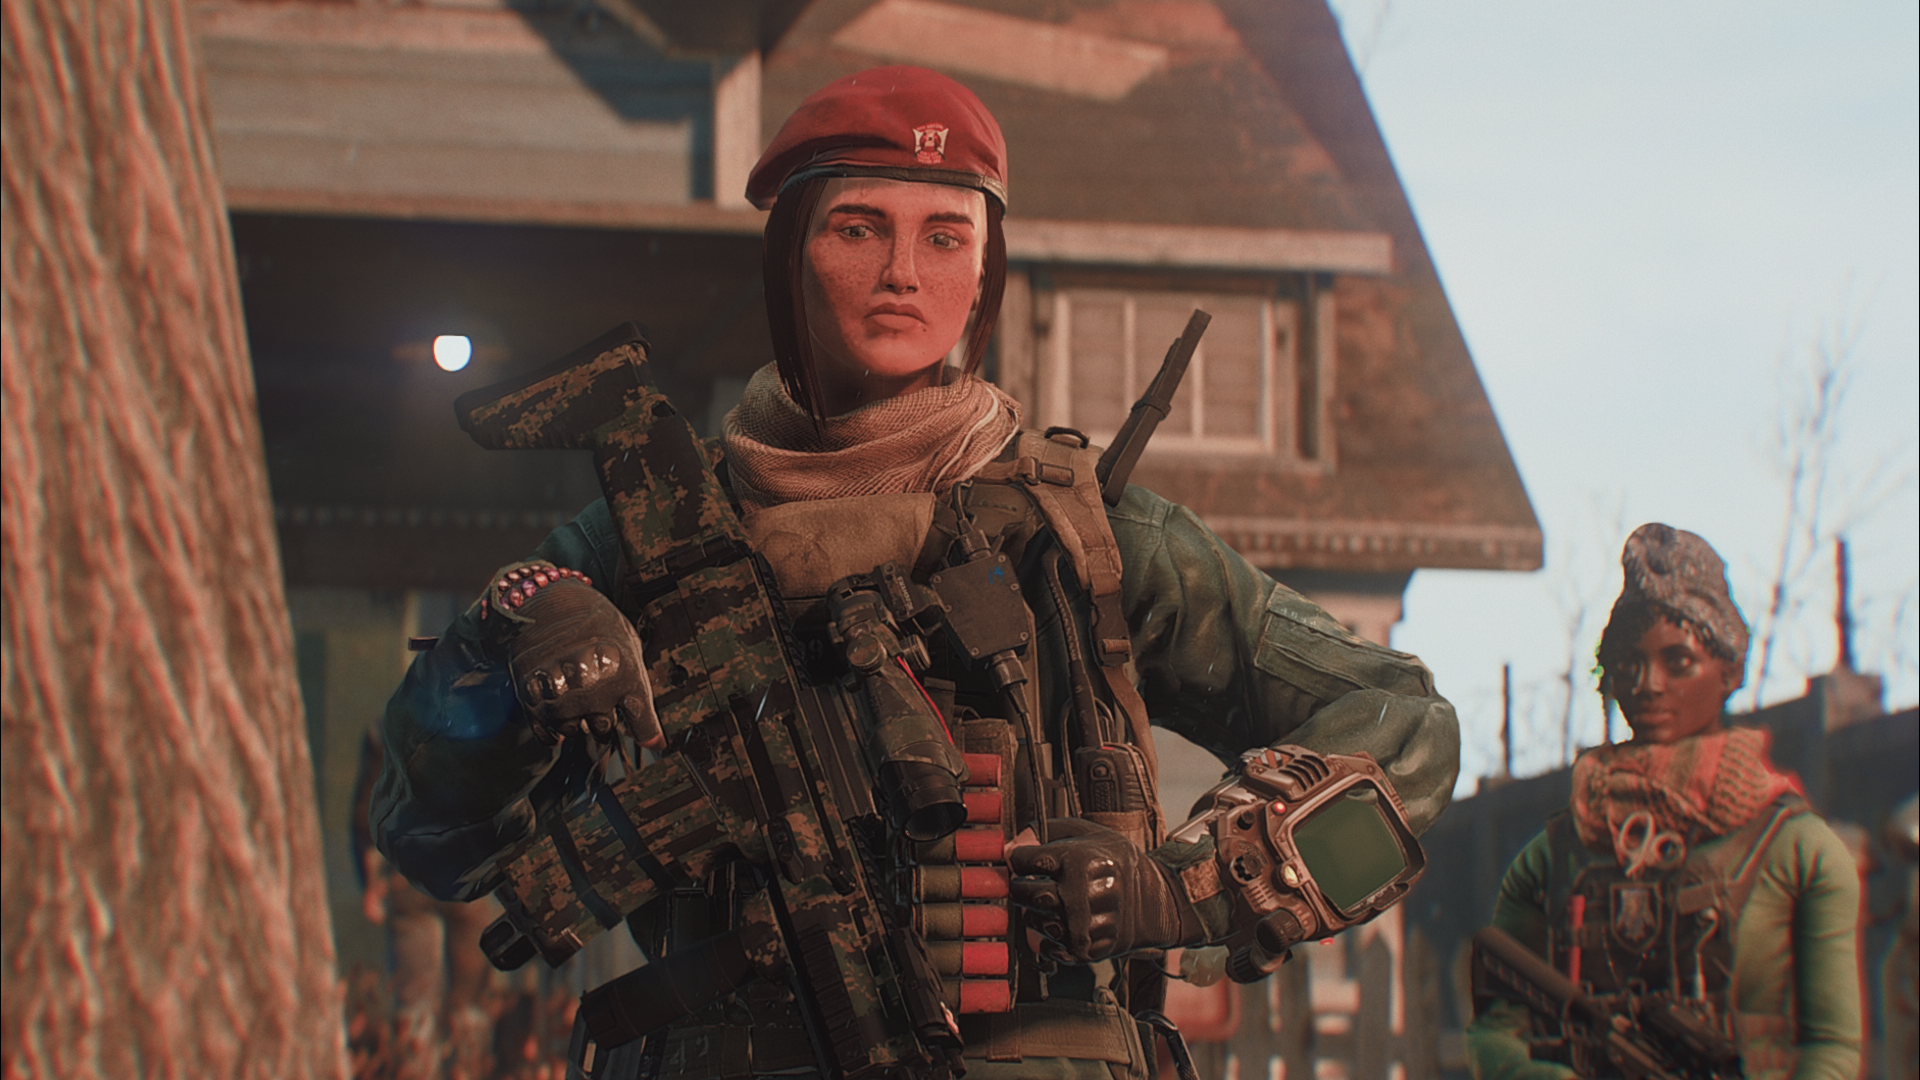 Ranger Ellie Williams at Fallout 4 Nexus and community